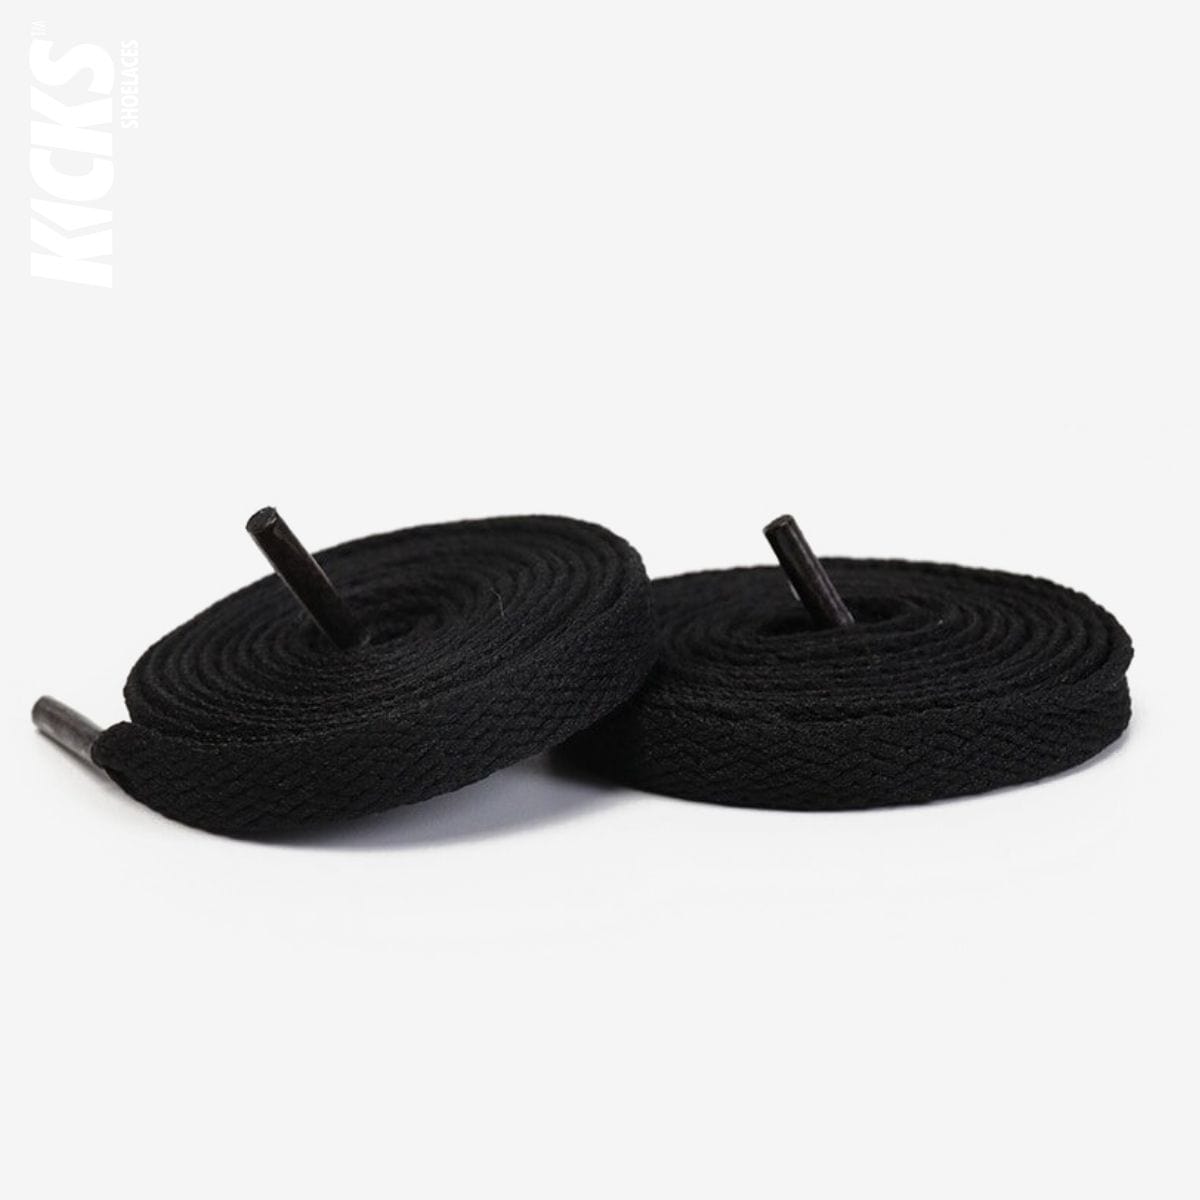 Black Replacement Nike Shoe Laces for Air Force 1 Sneakers by Kicks Shoelaces